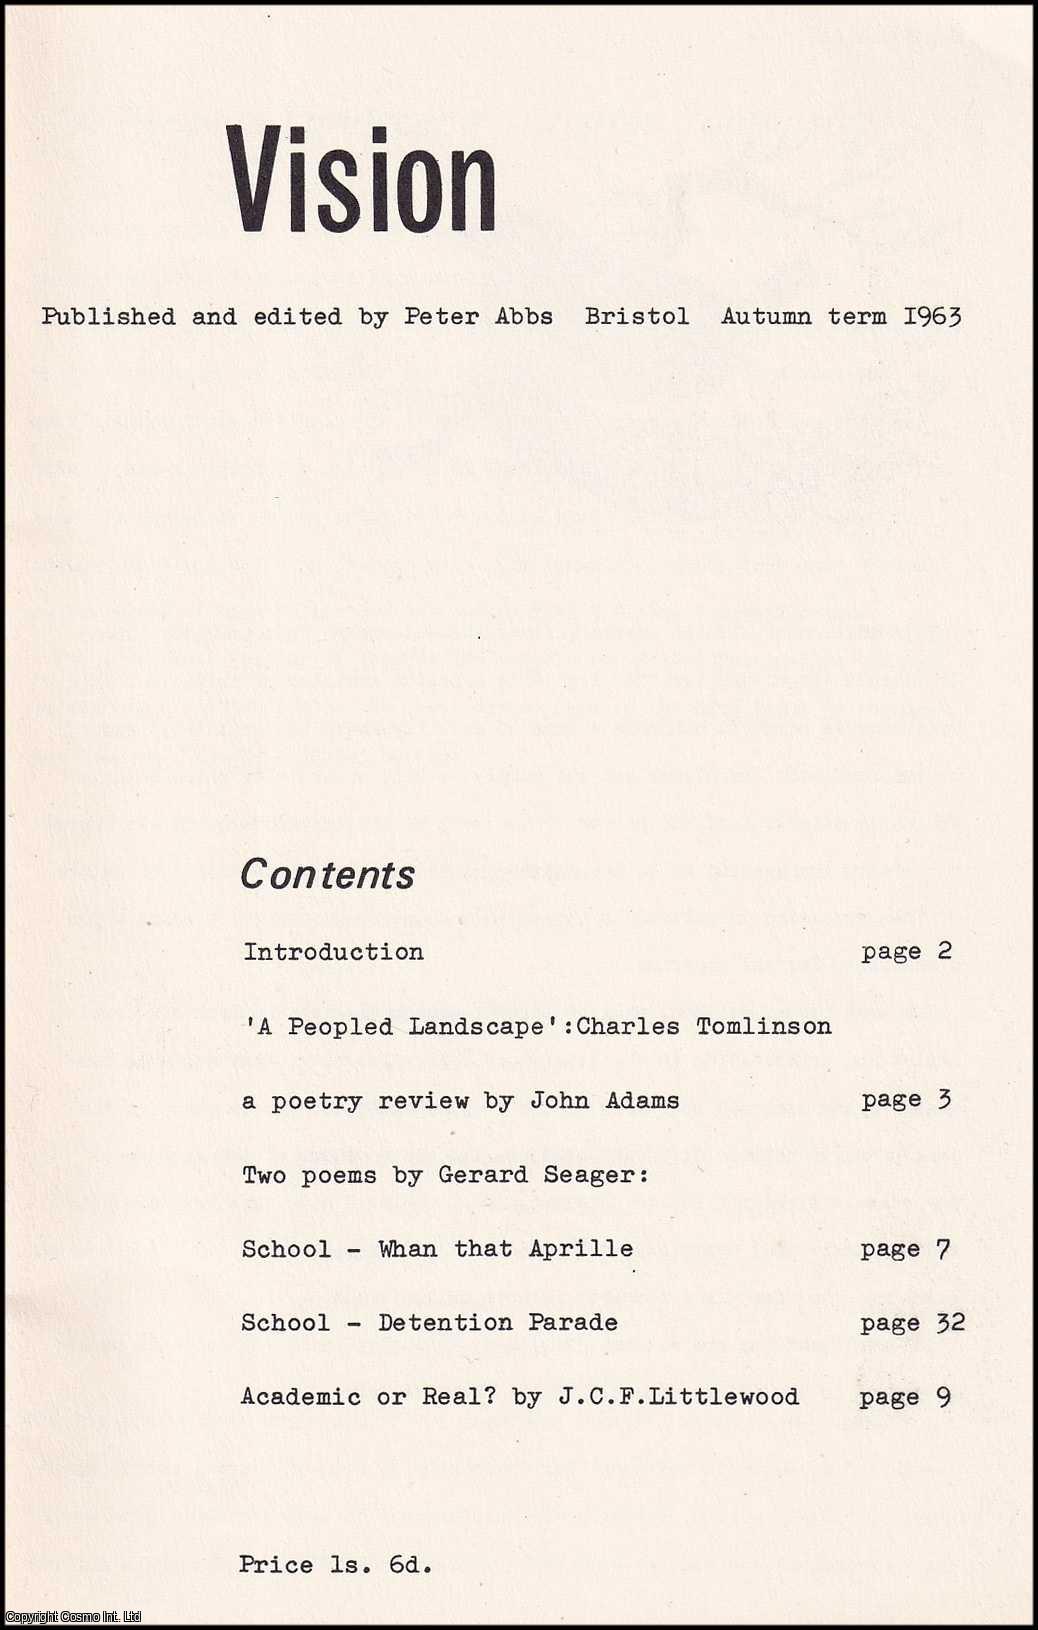 Peter Abbs - Vision. Bristol, Autumn term 1963. Includes work by a number of contributors, including Charles Tomlinson. (See picture for contributors list).